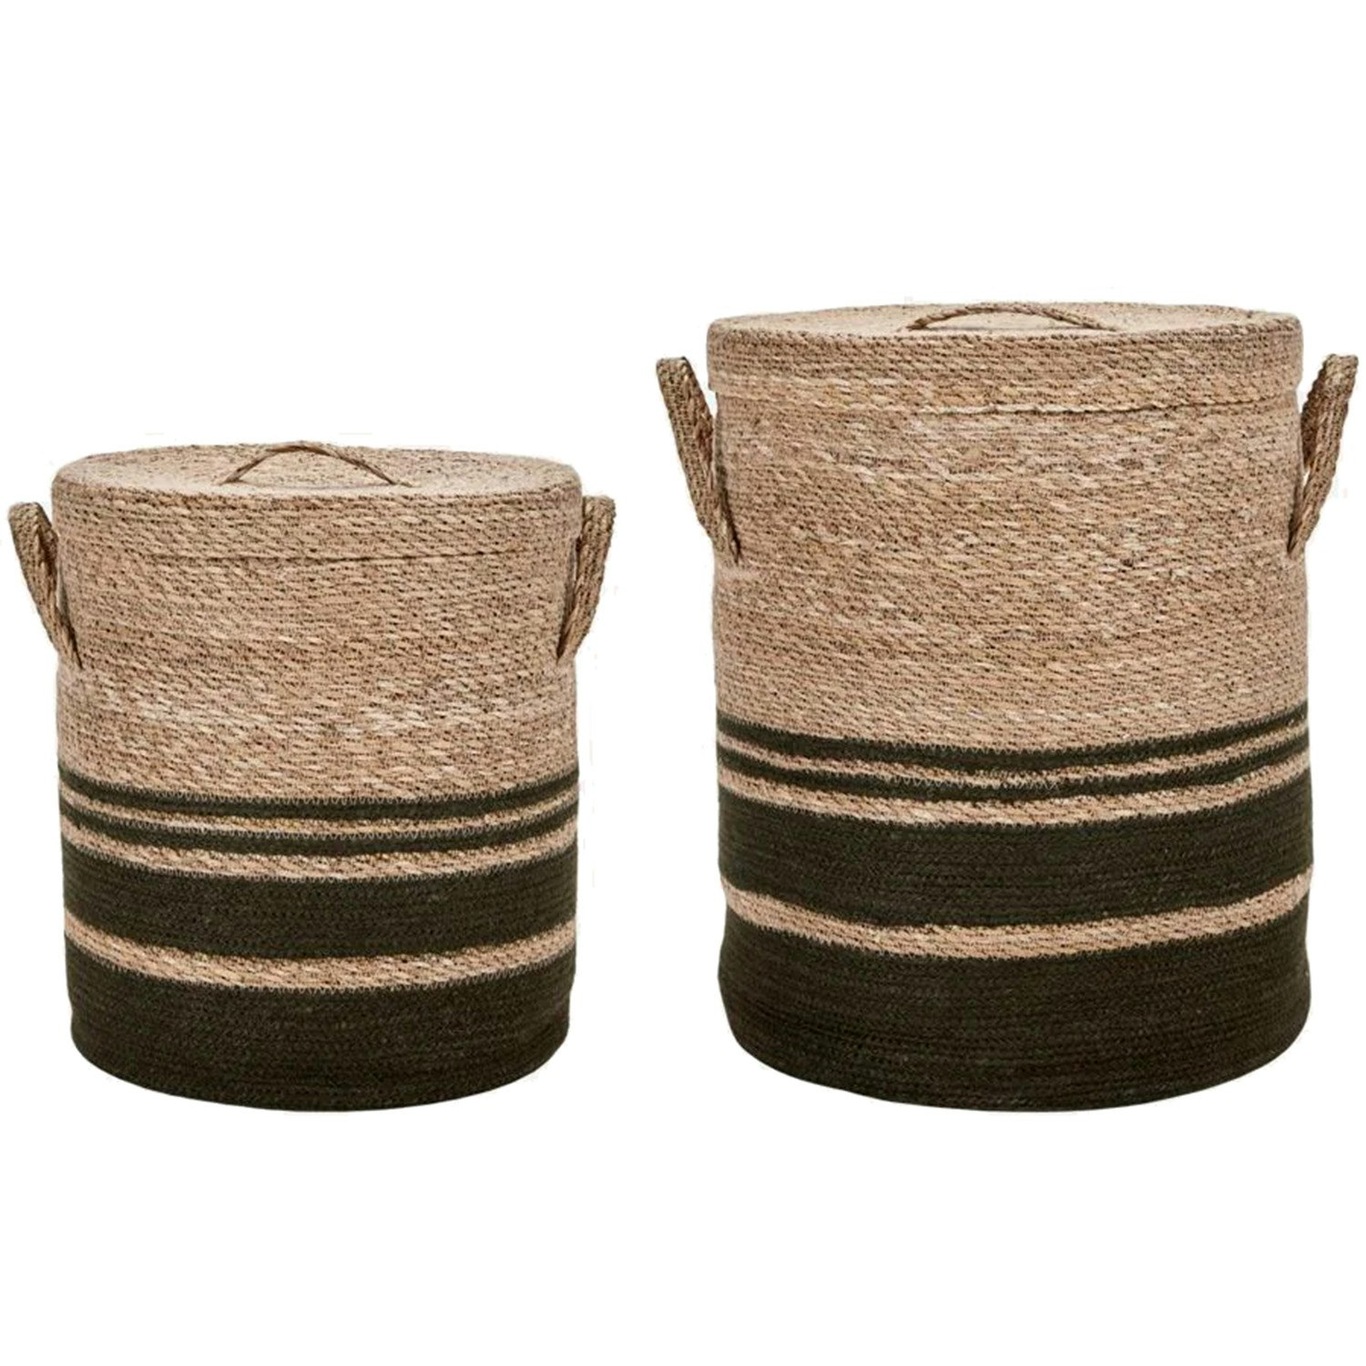 Army Laundry Basket With Lid, 2-pack